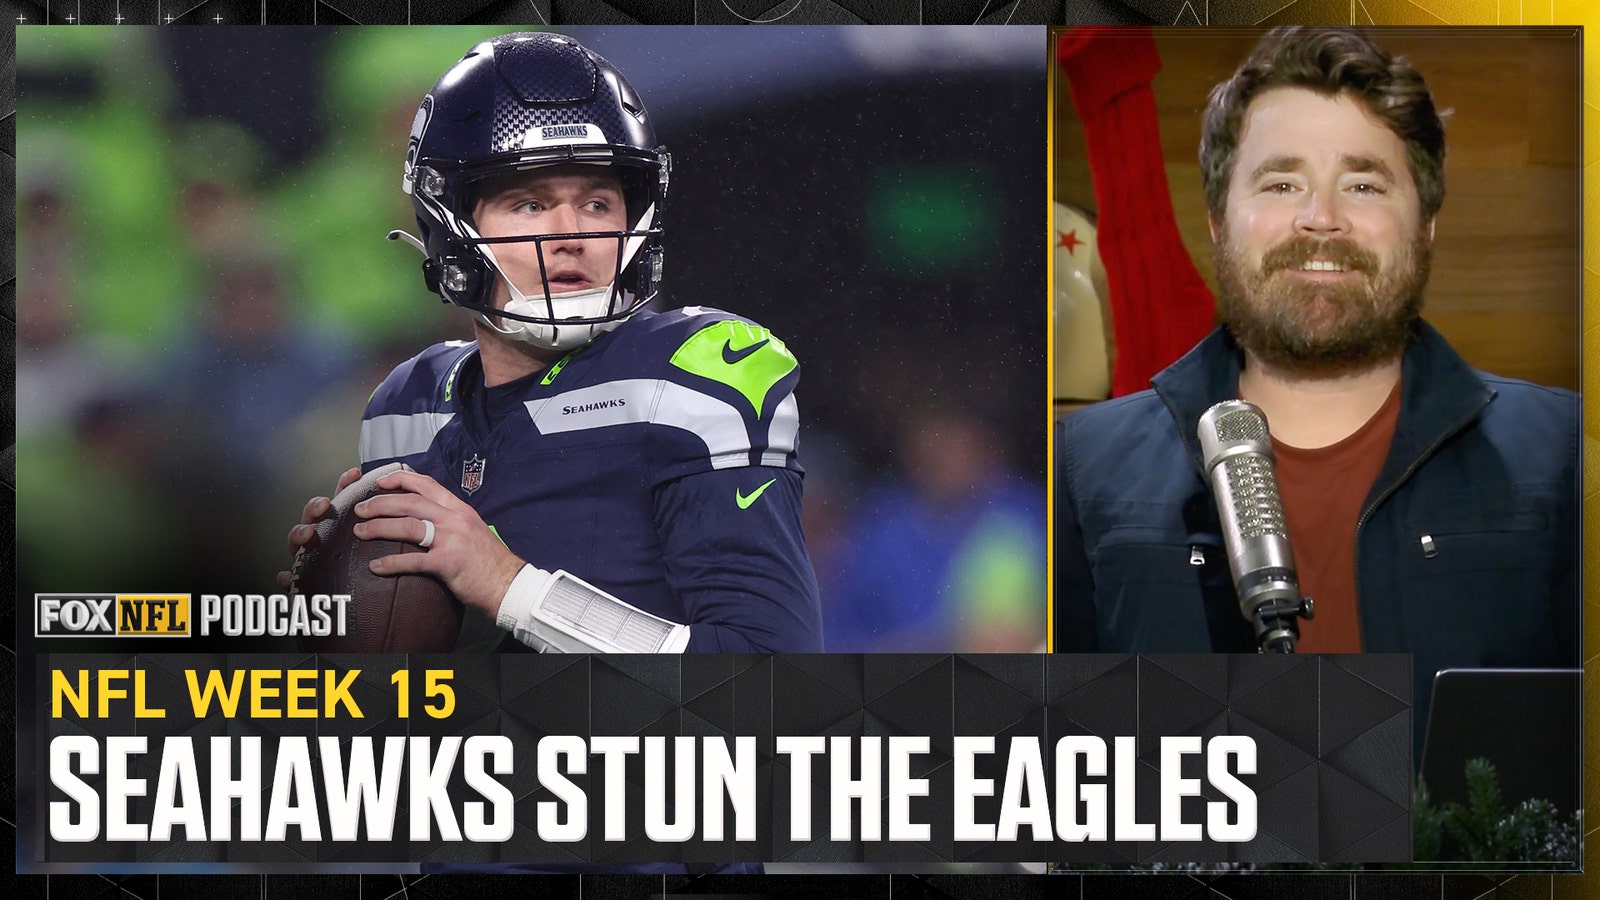 Dave Helman reacts to Seahawks' upset over Eagles